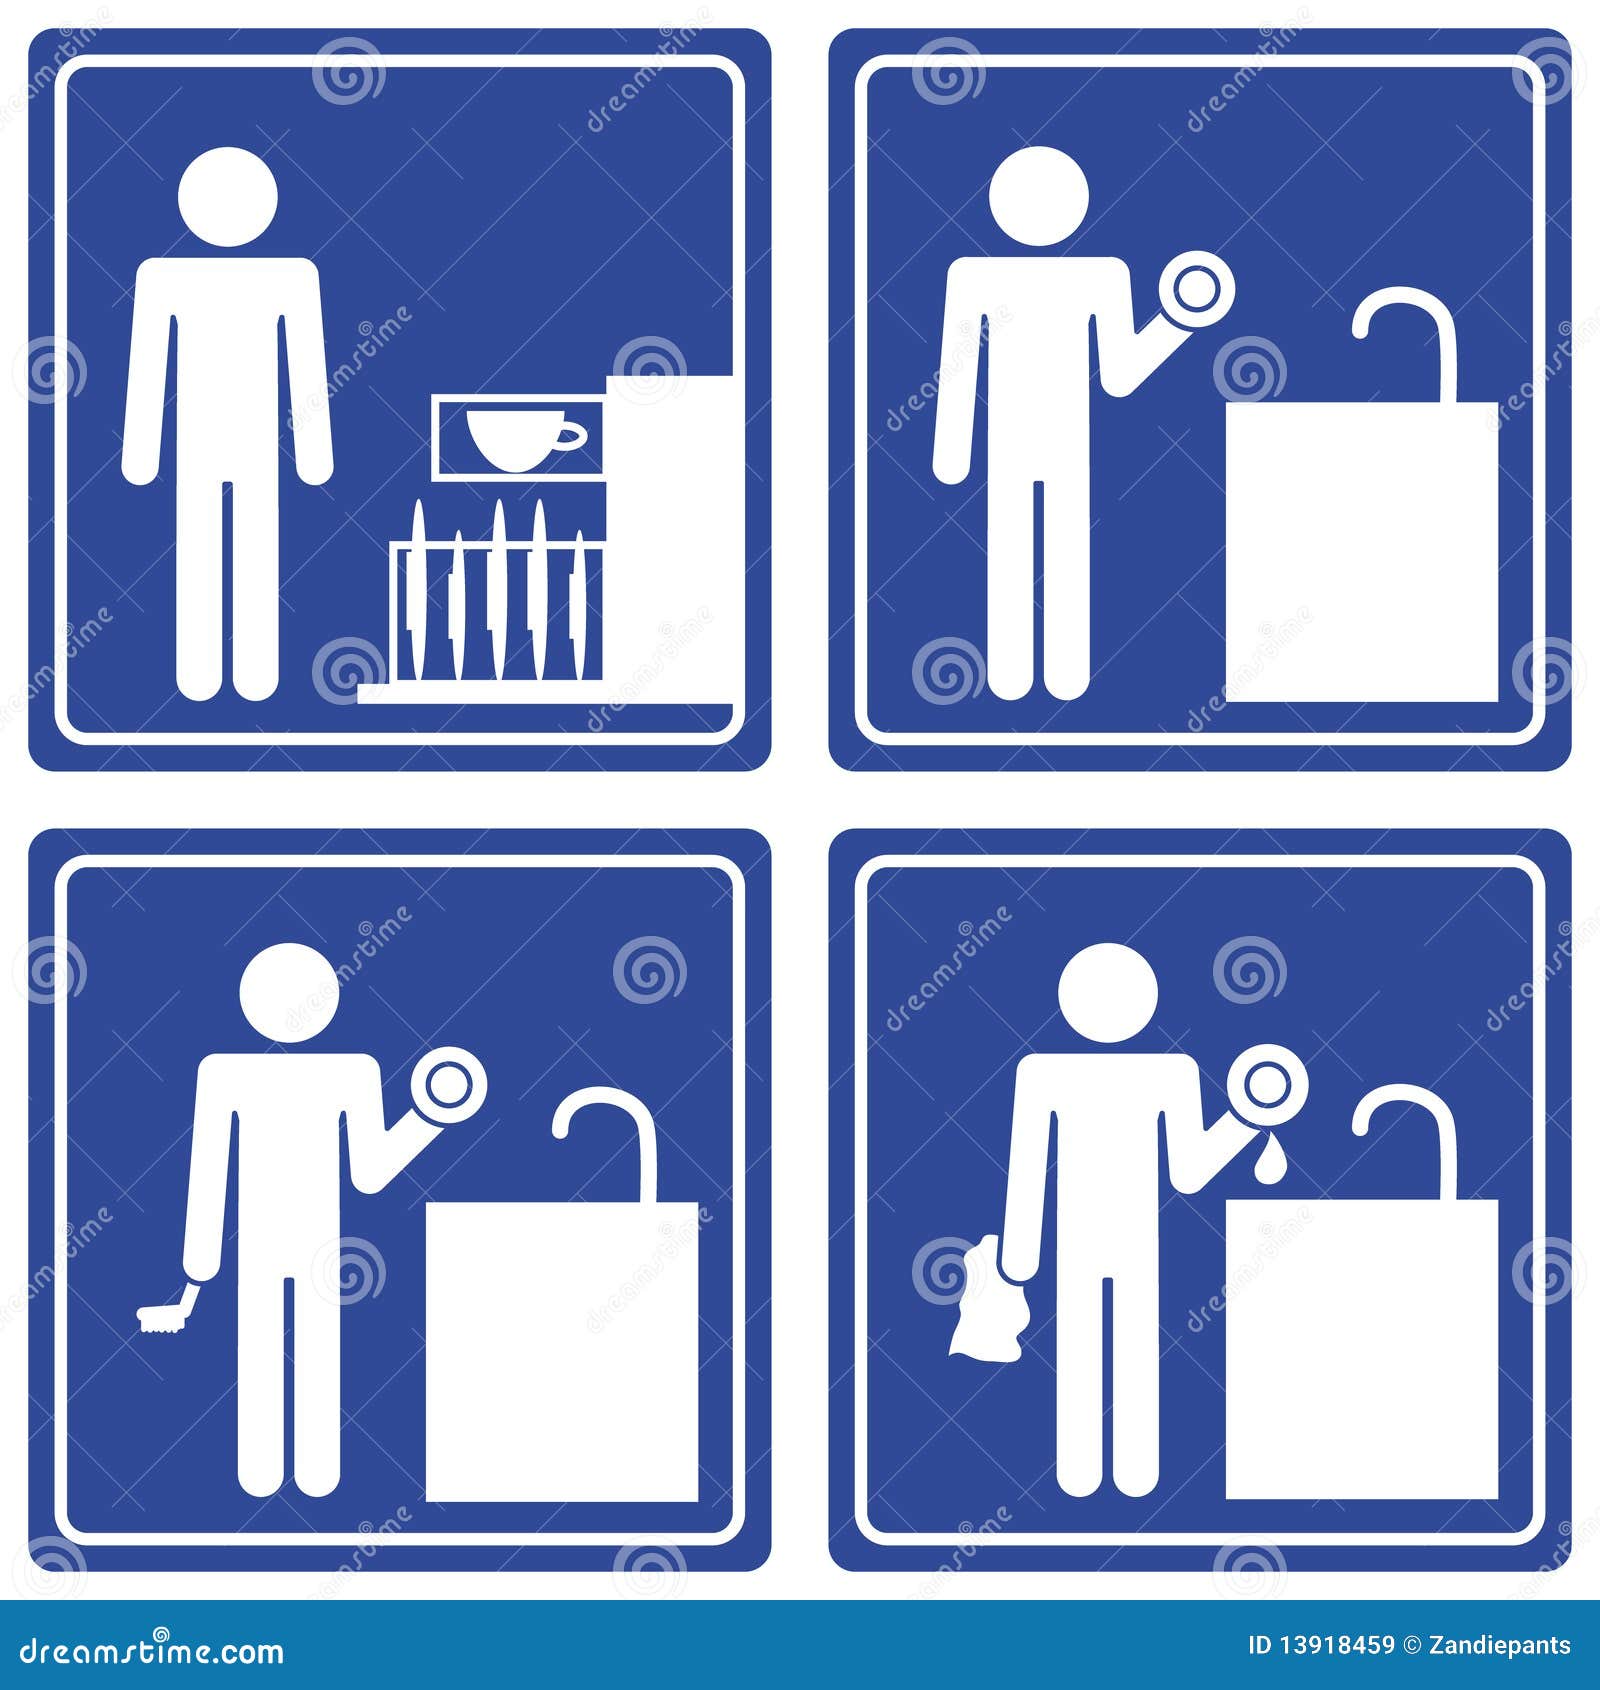 pictograph - washing dishes, male